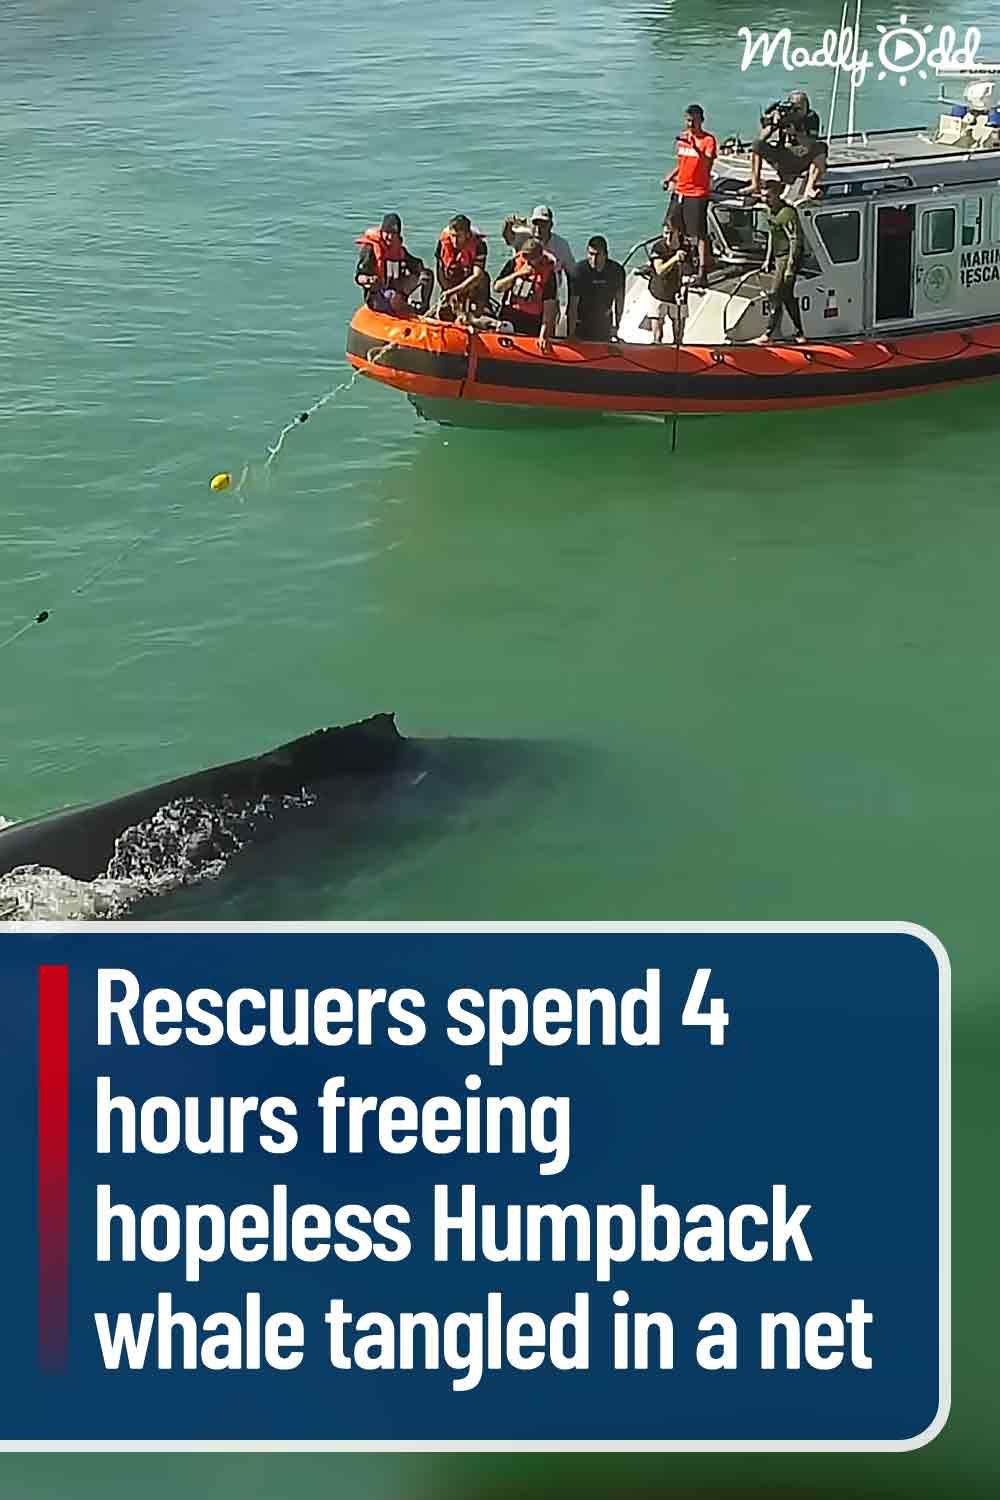 Rescuers spend 4 hours freeing hopeless Humpback whale tangled in a net